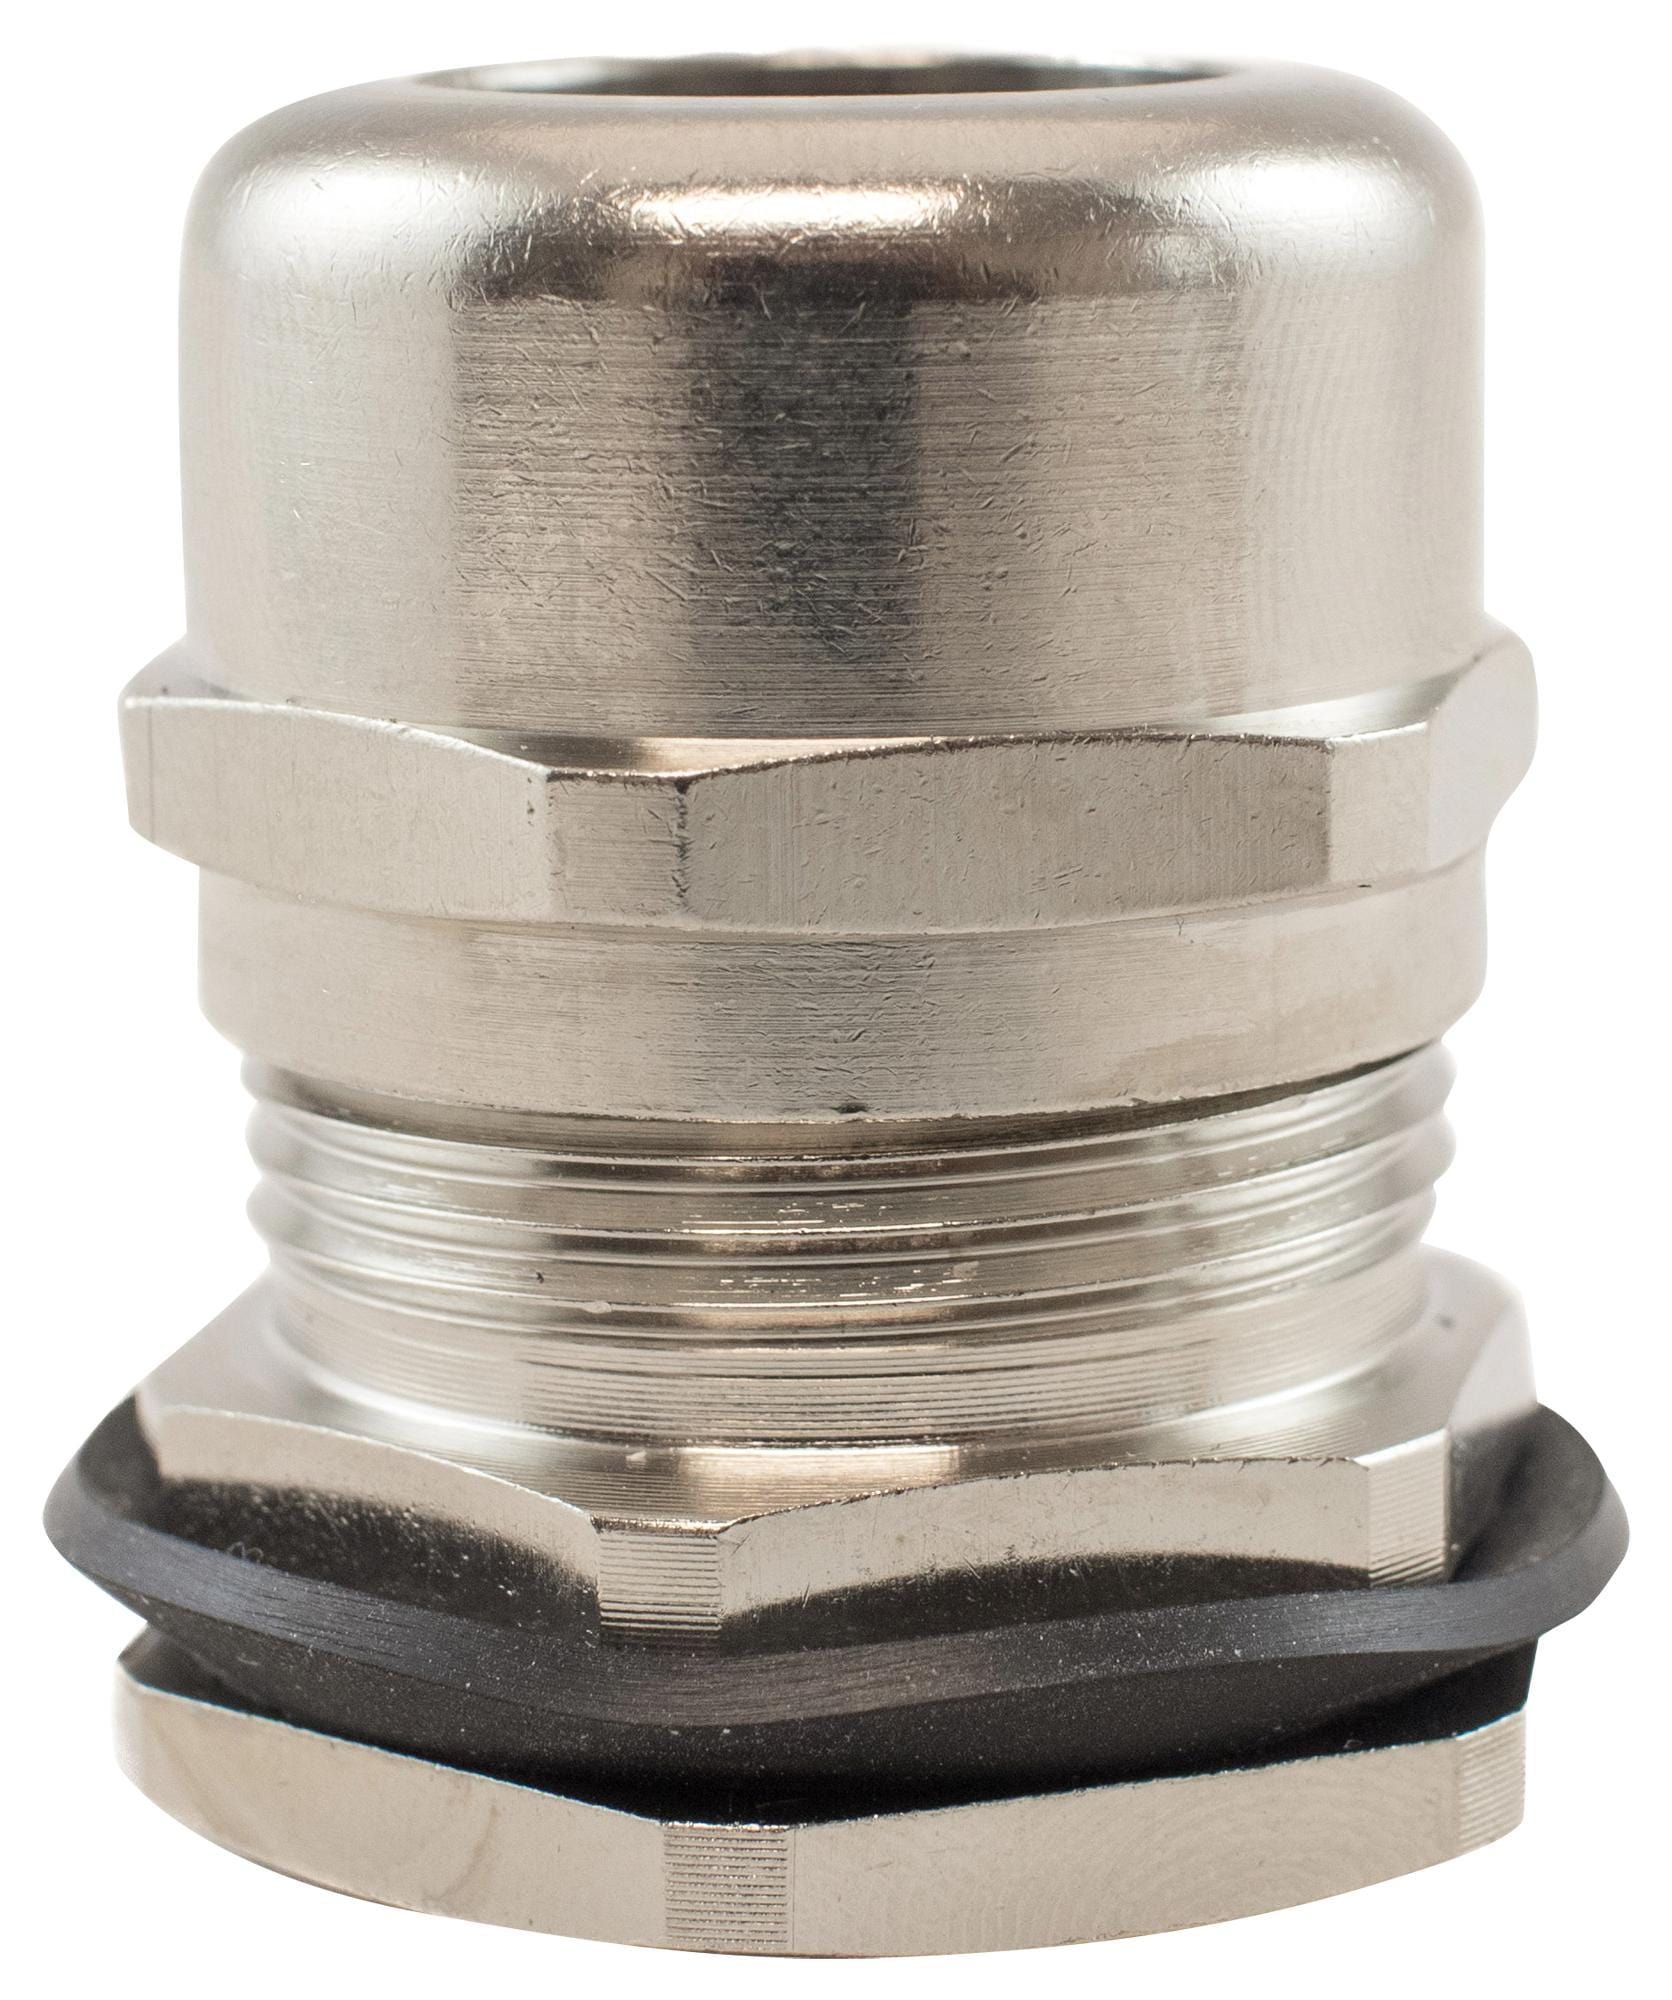 ALPHA WIRE Glands MPG16 NC080 CABLE GLAND, PG16, BRASS, 10-14MM ALPHA WIRE 2891963 MPG16 NC080